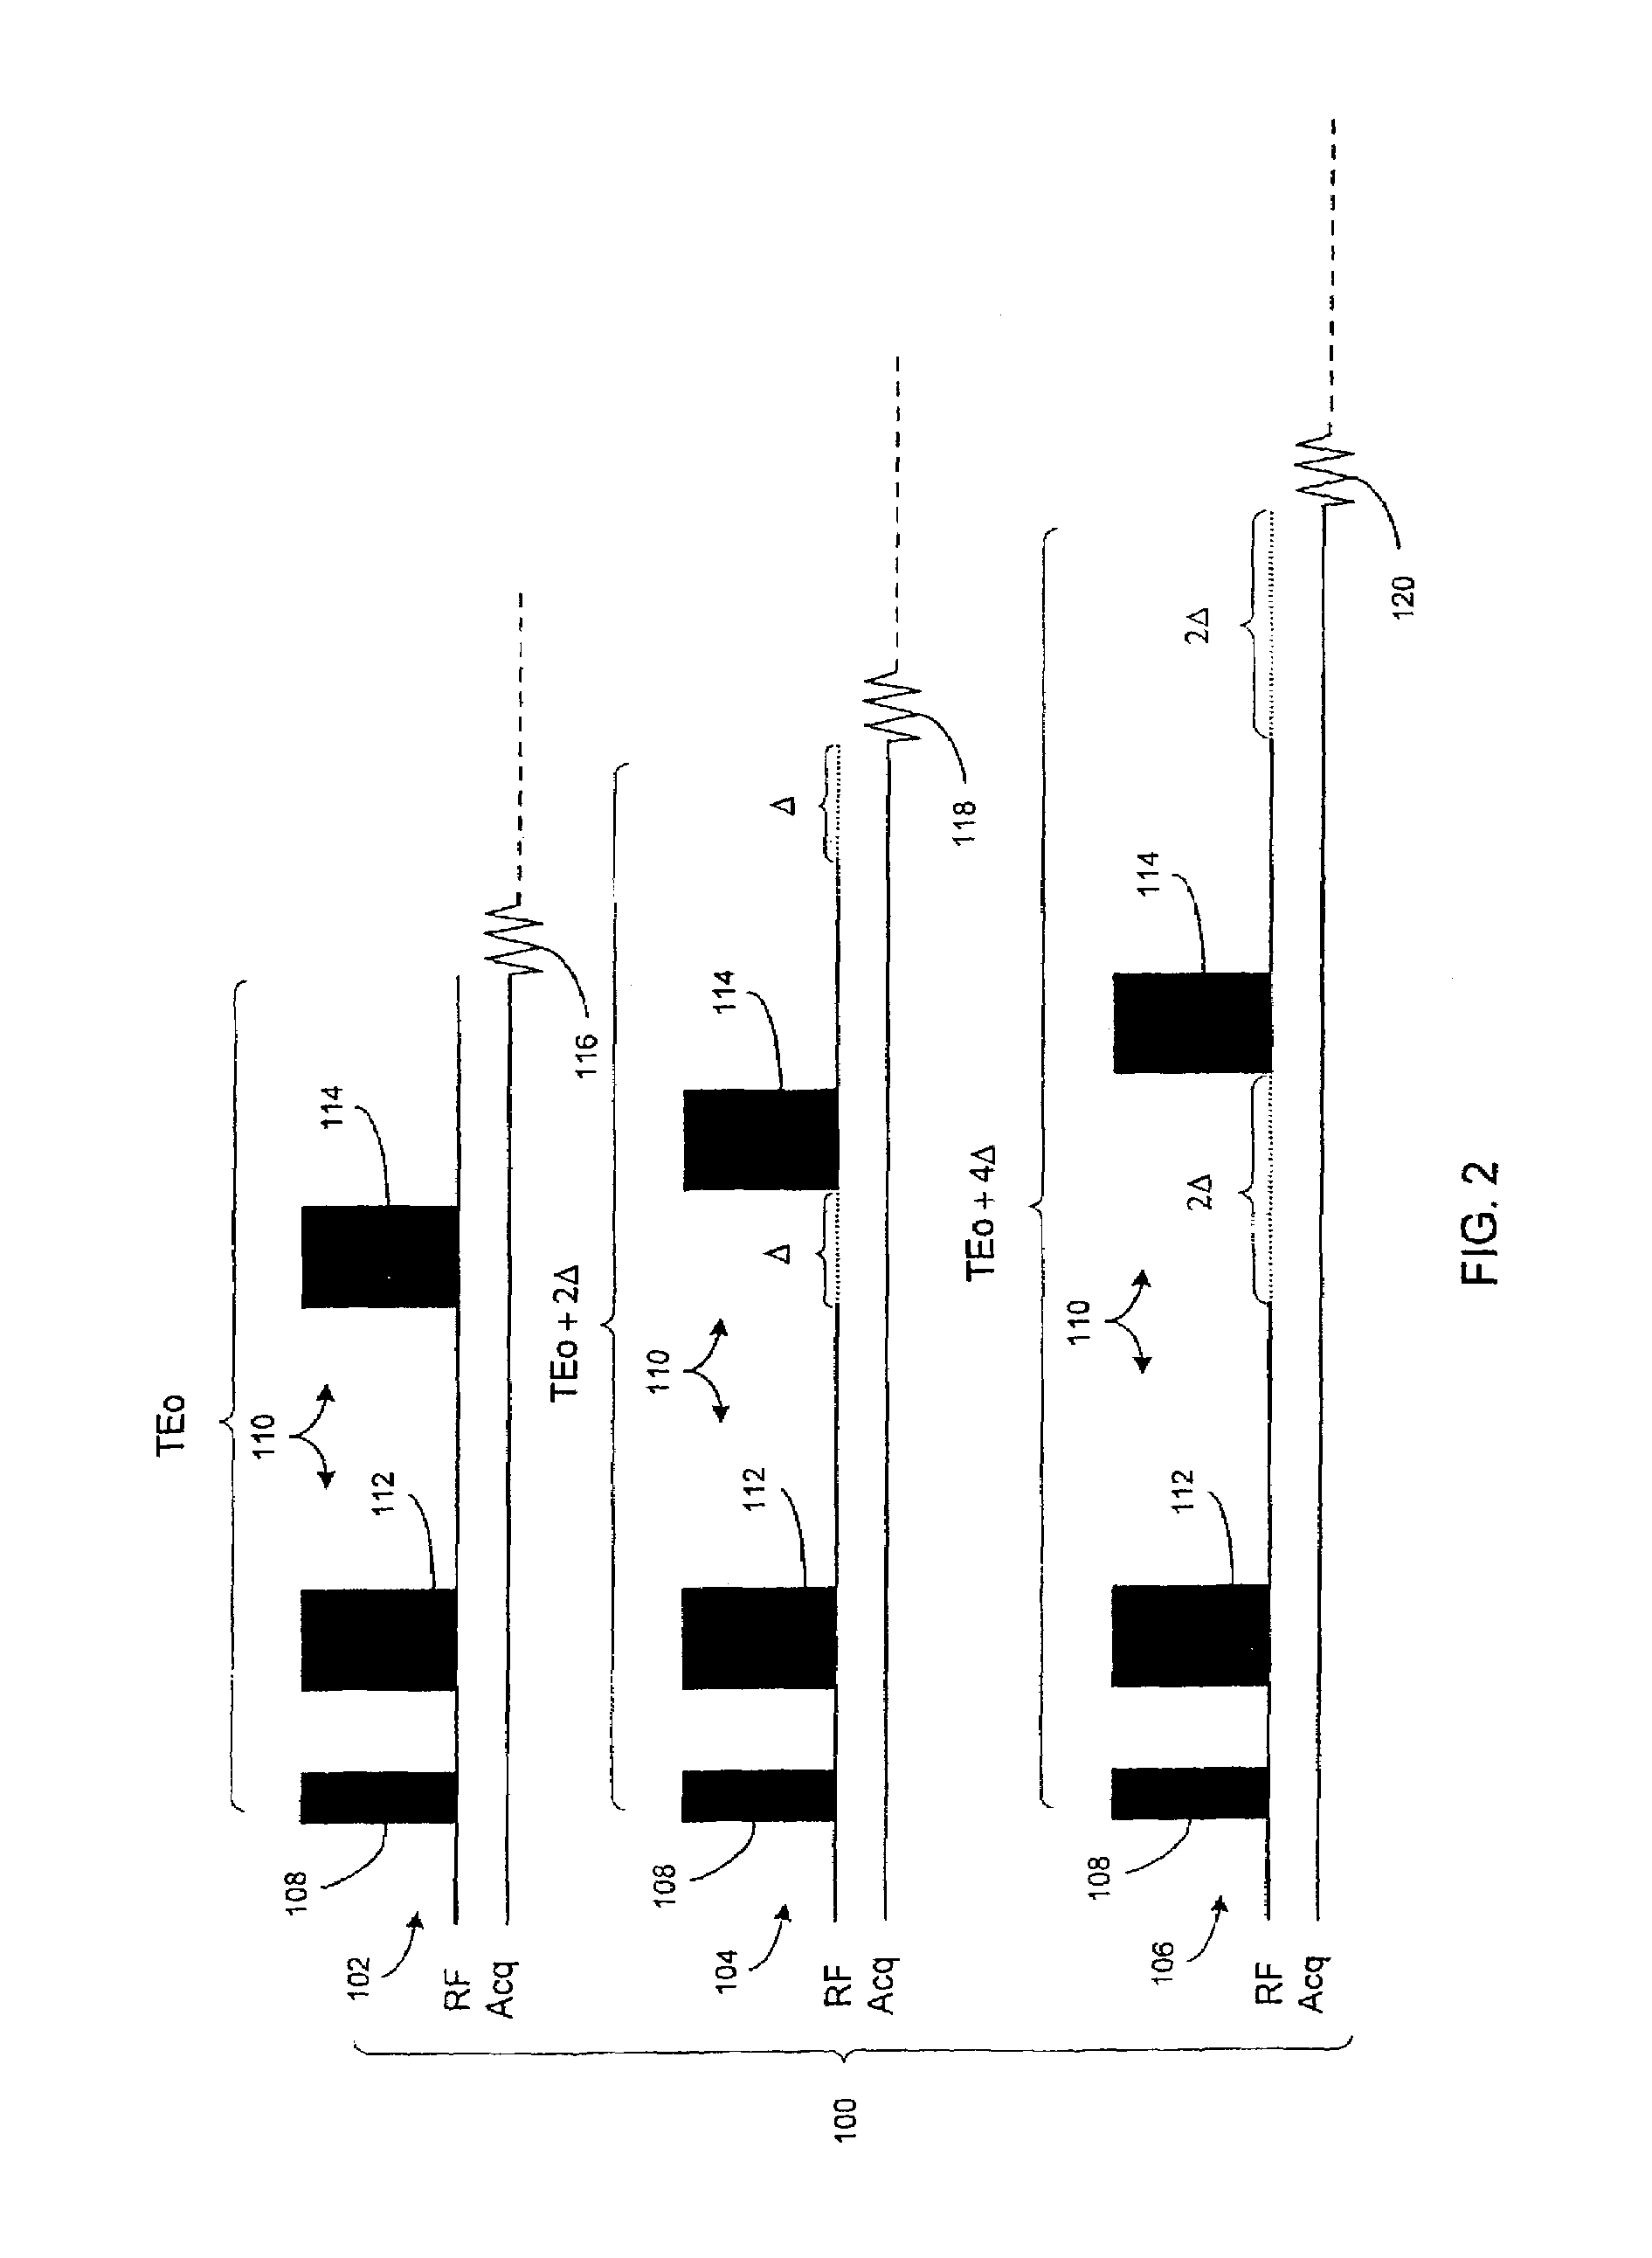 Method and apparatus for improved metabolite signal separation in MR spectroscopy